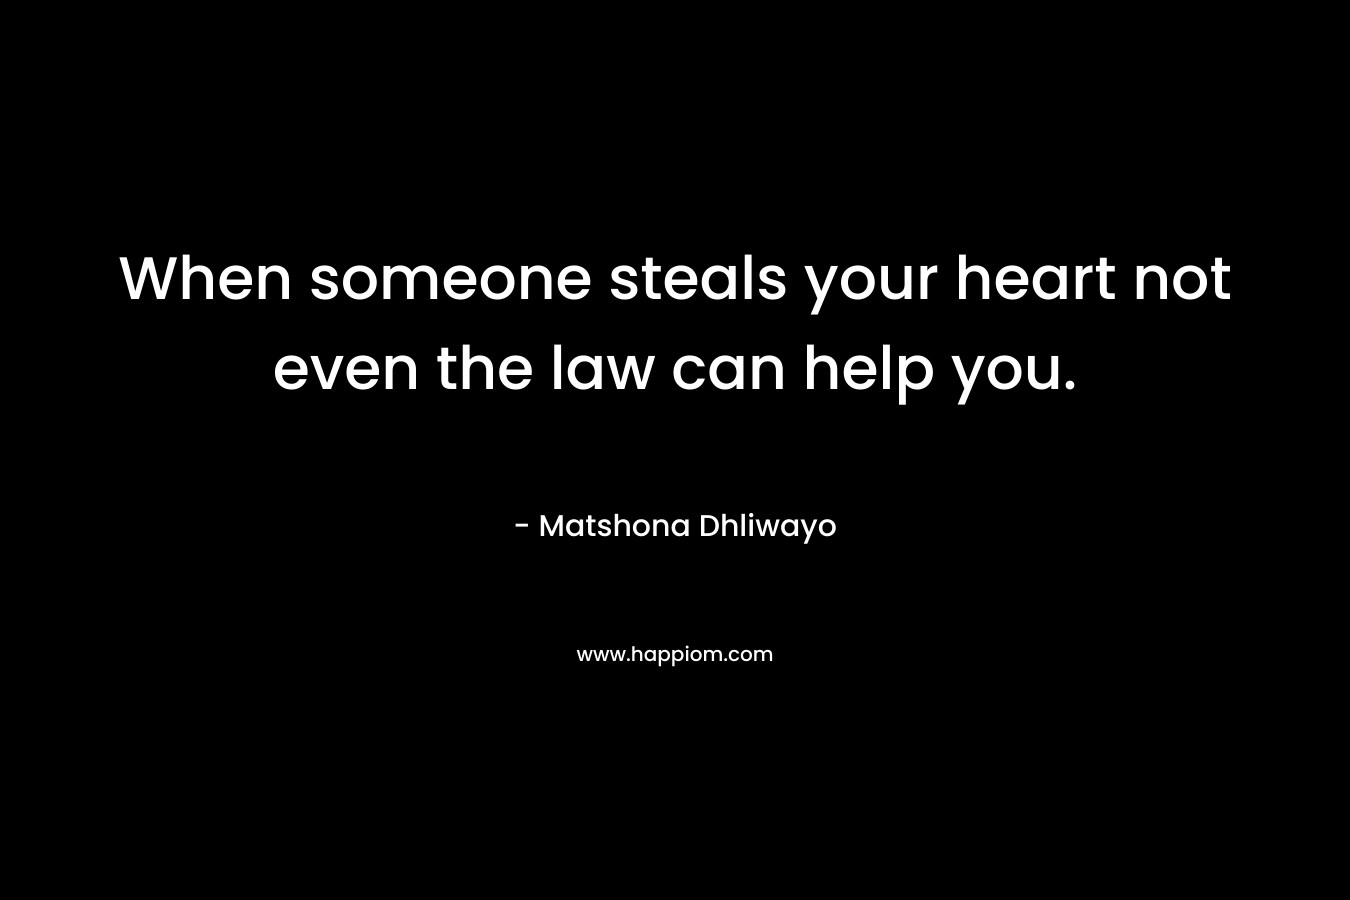 When someone steals your heart not even the law can help you. – Matshona Dhliwayo